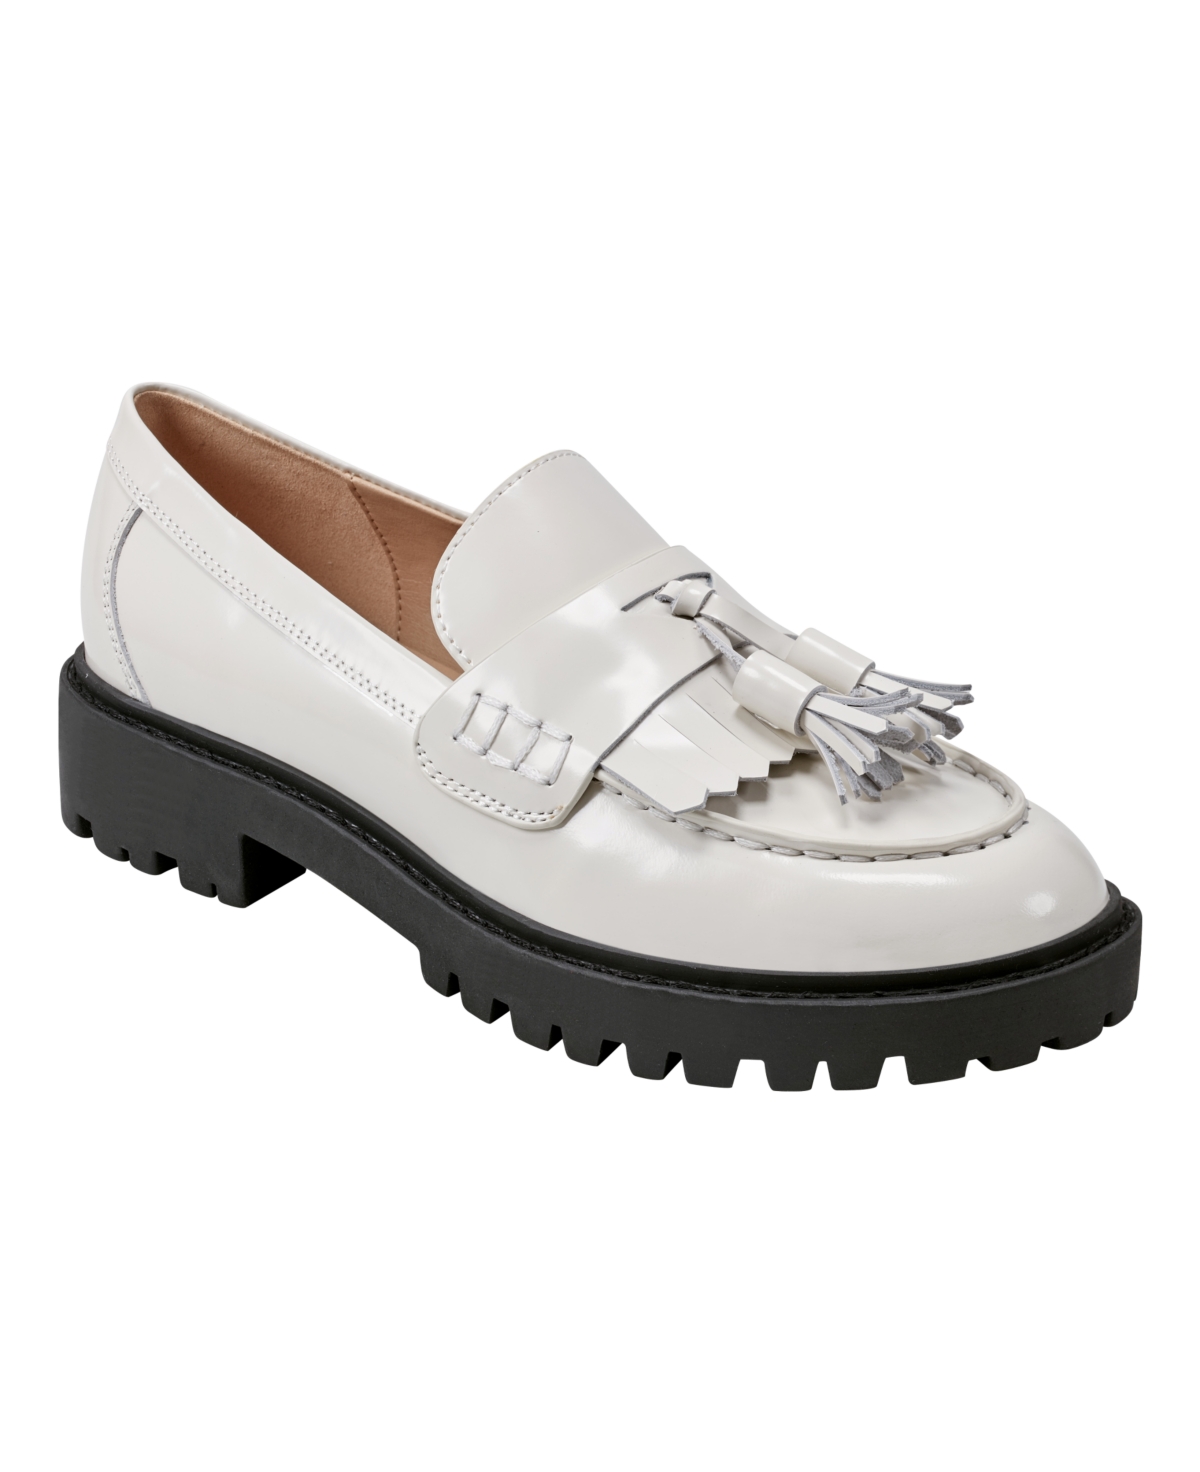 Women's Ozzie Slip-on Lug-sole Casual Loafers - Ivory Leather